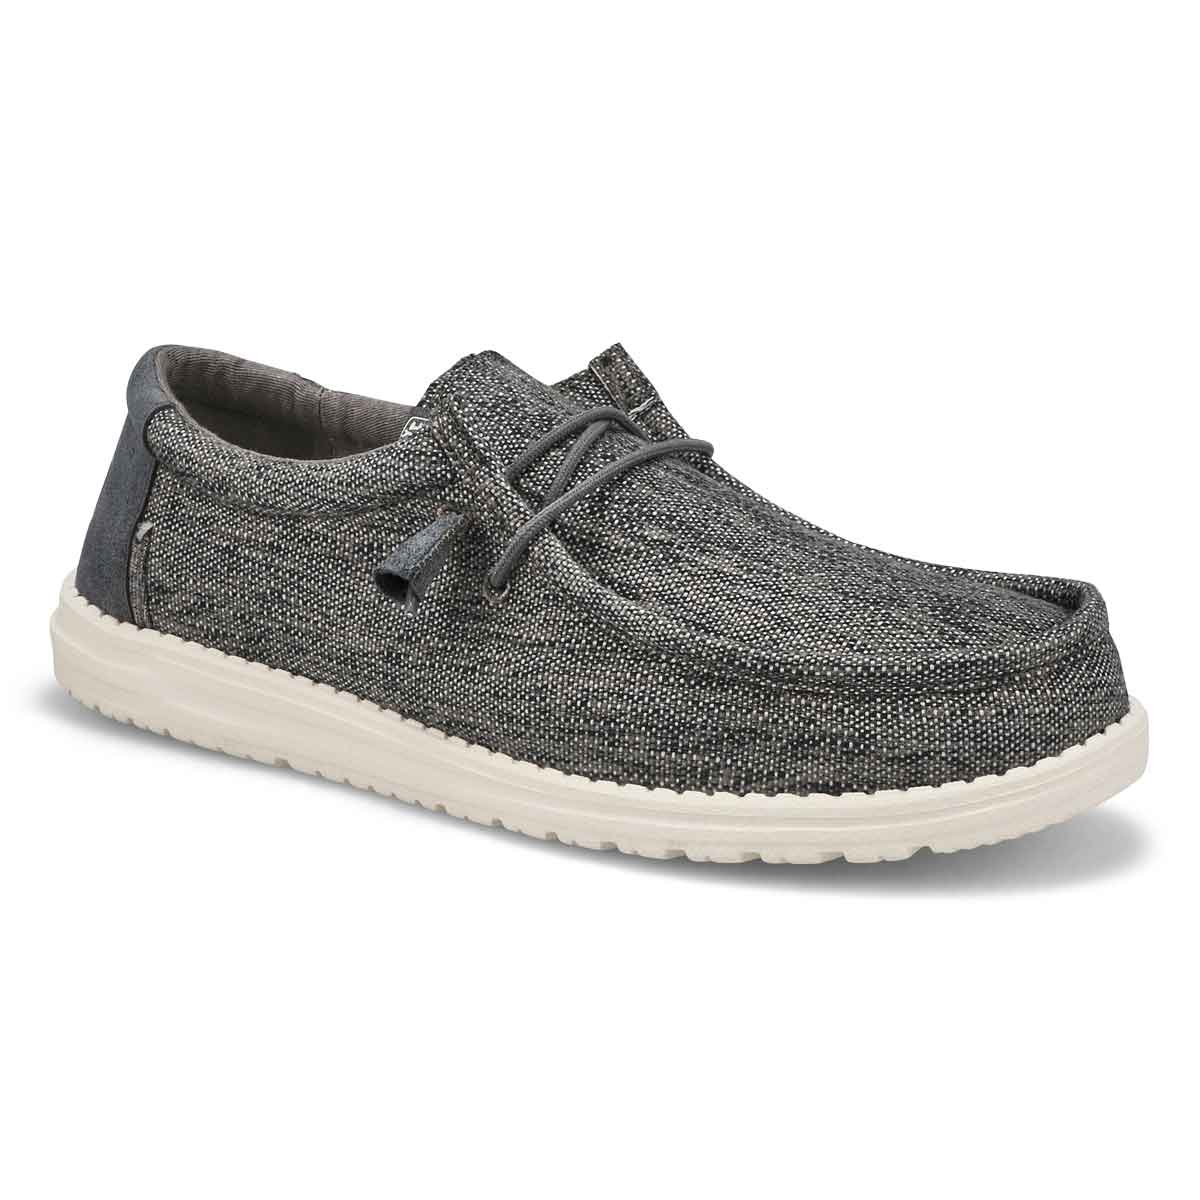 HEYDUDE Men's Wally Ascend Casual Shoe - Abys | SoftMoc.com